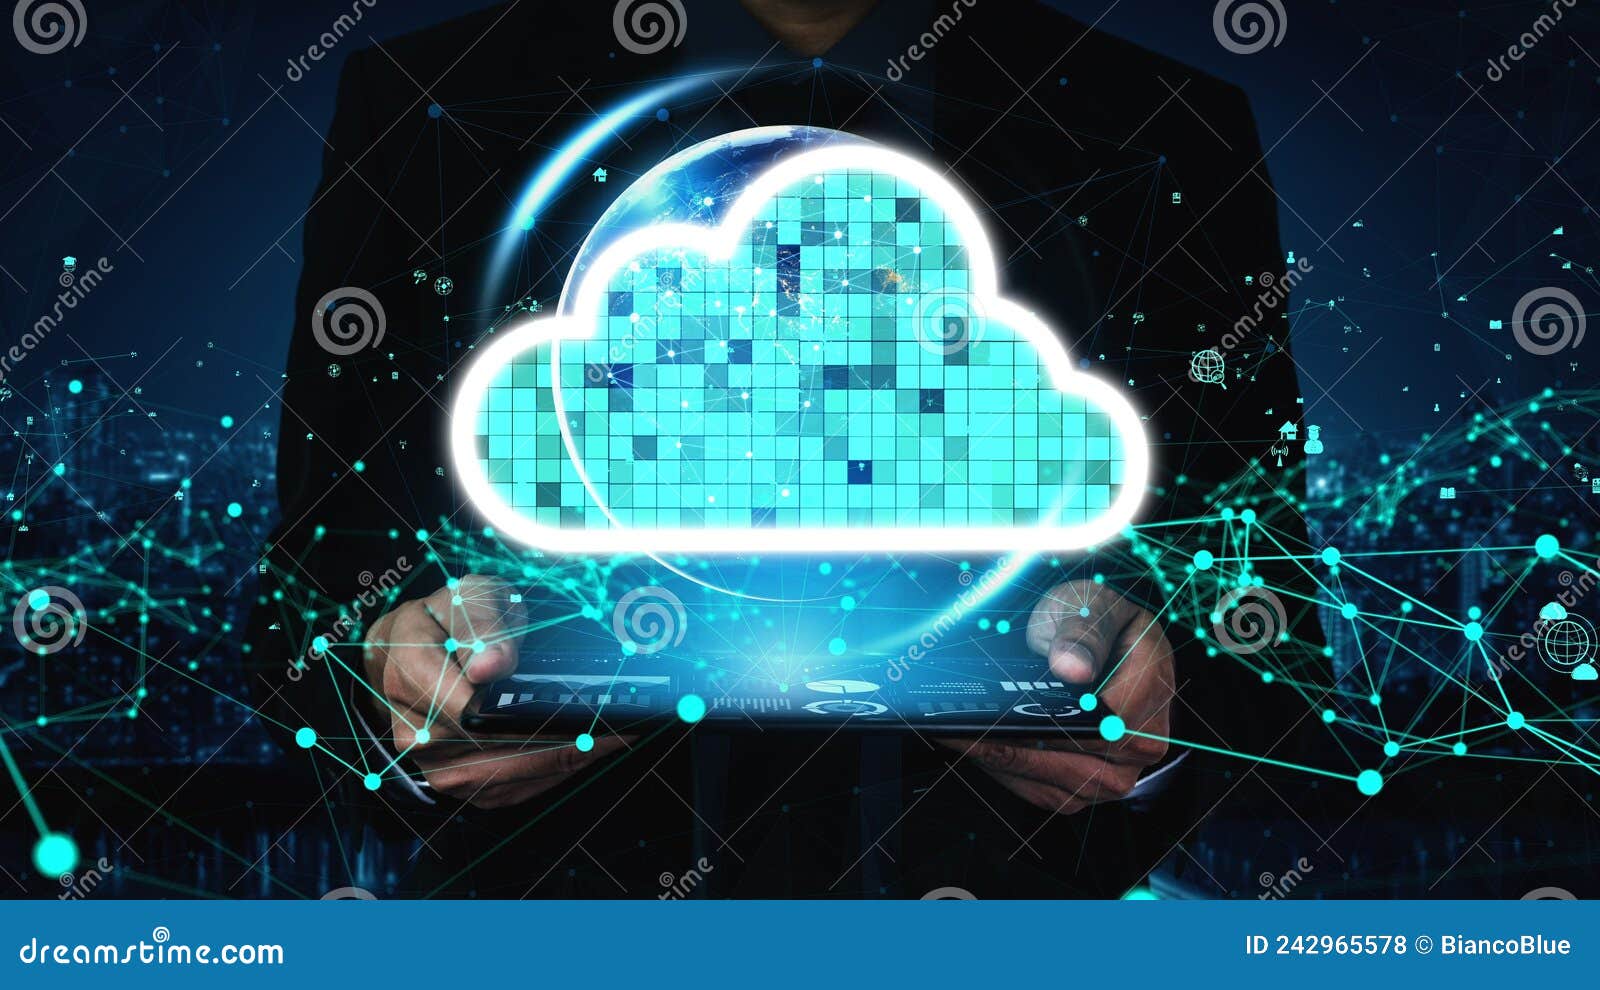 Conceptual Cloud Computing And Data Storage Technology For Future